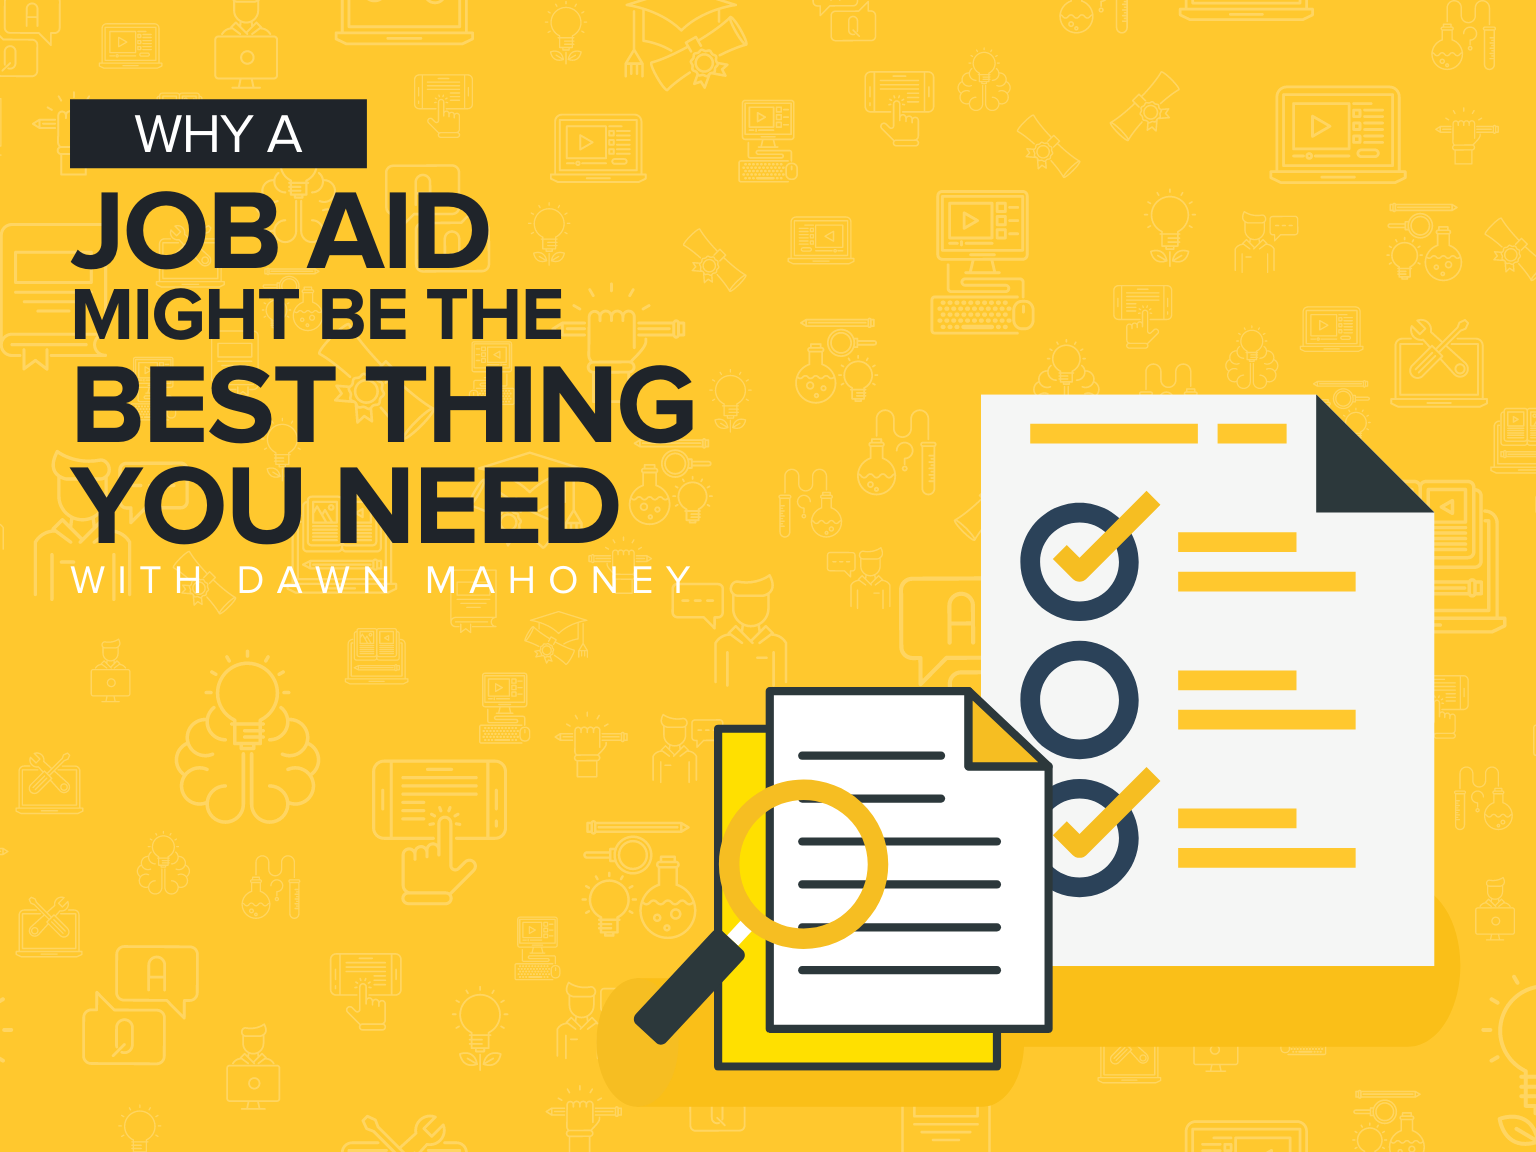 Why A Job Aid Might Be the Best Thing You Need with Dawn Mahoney